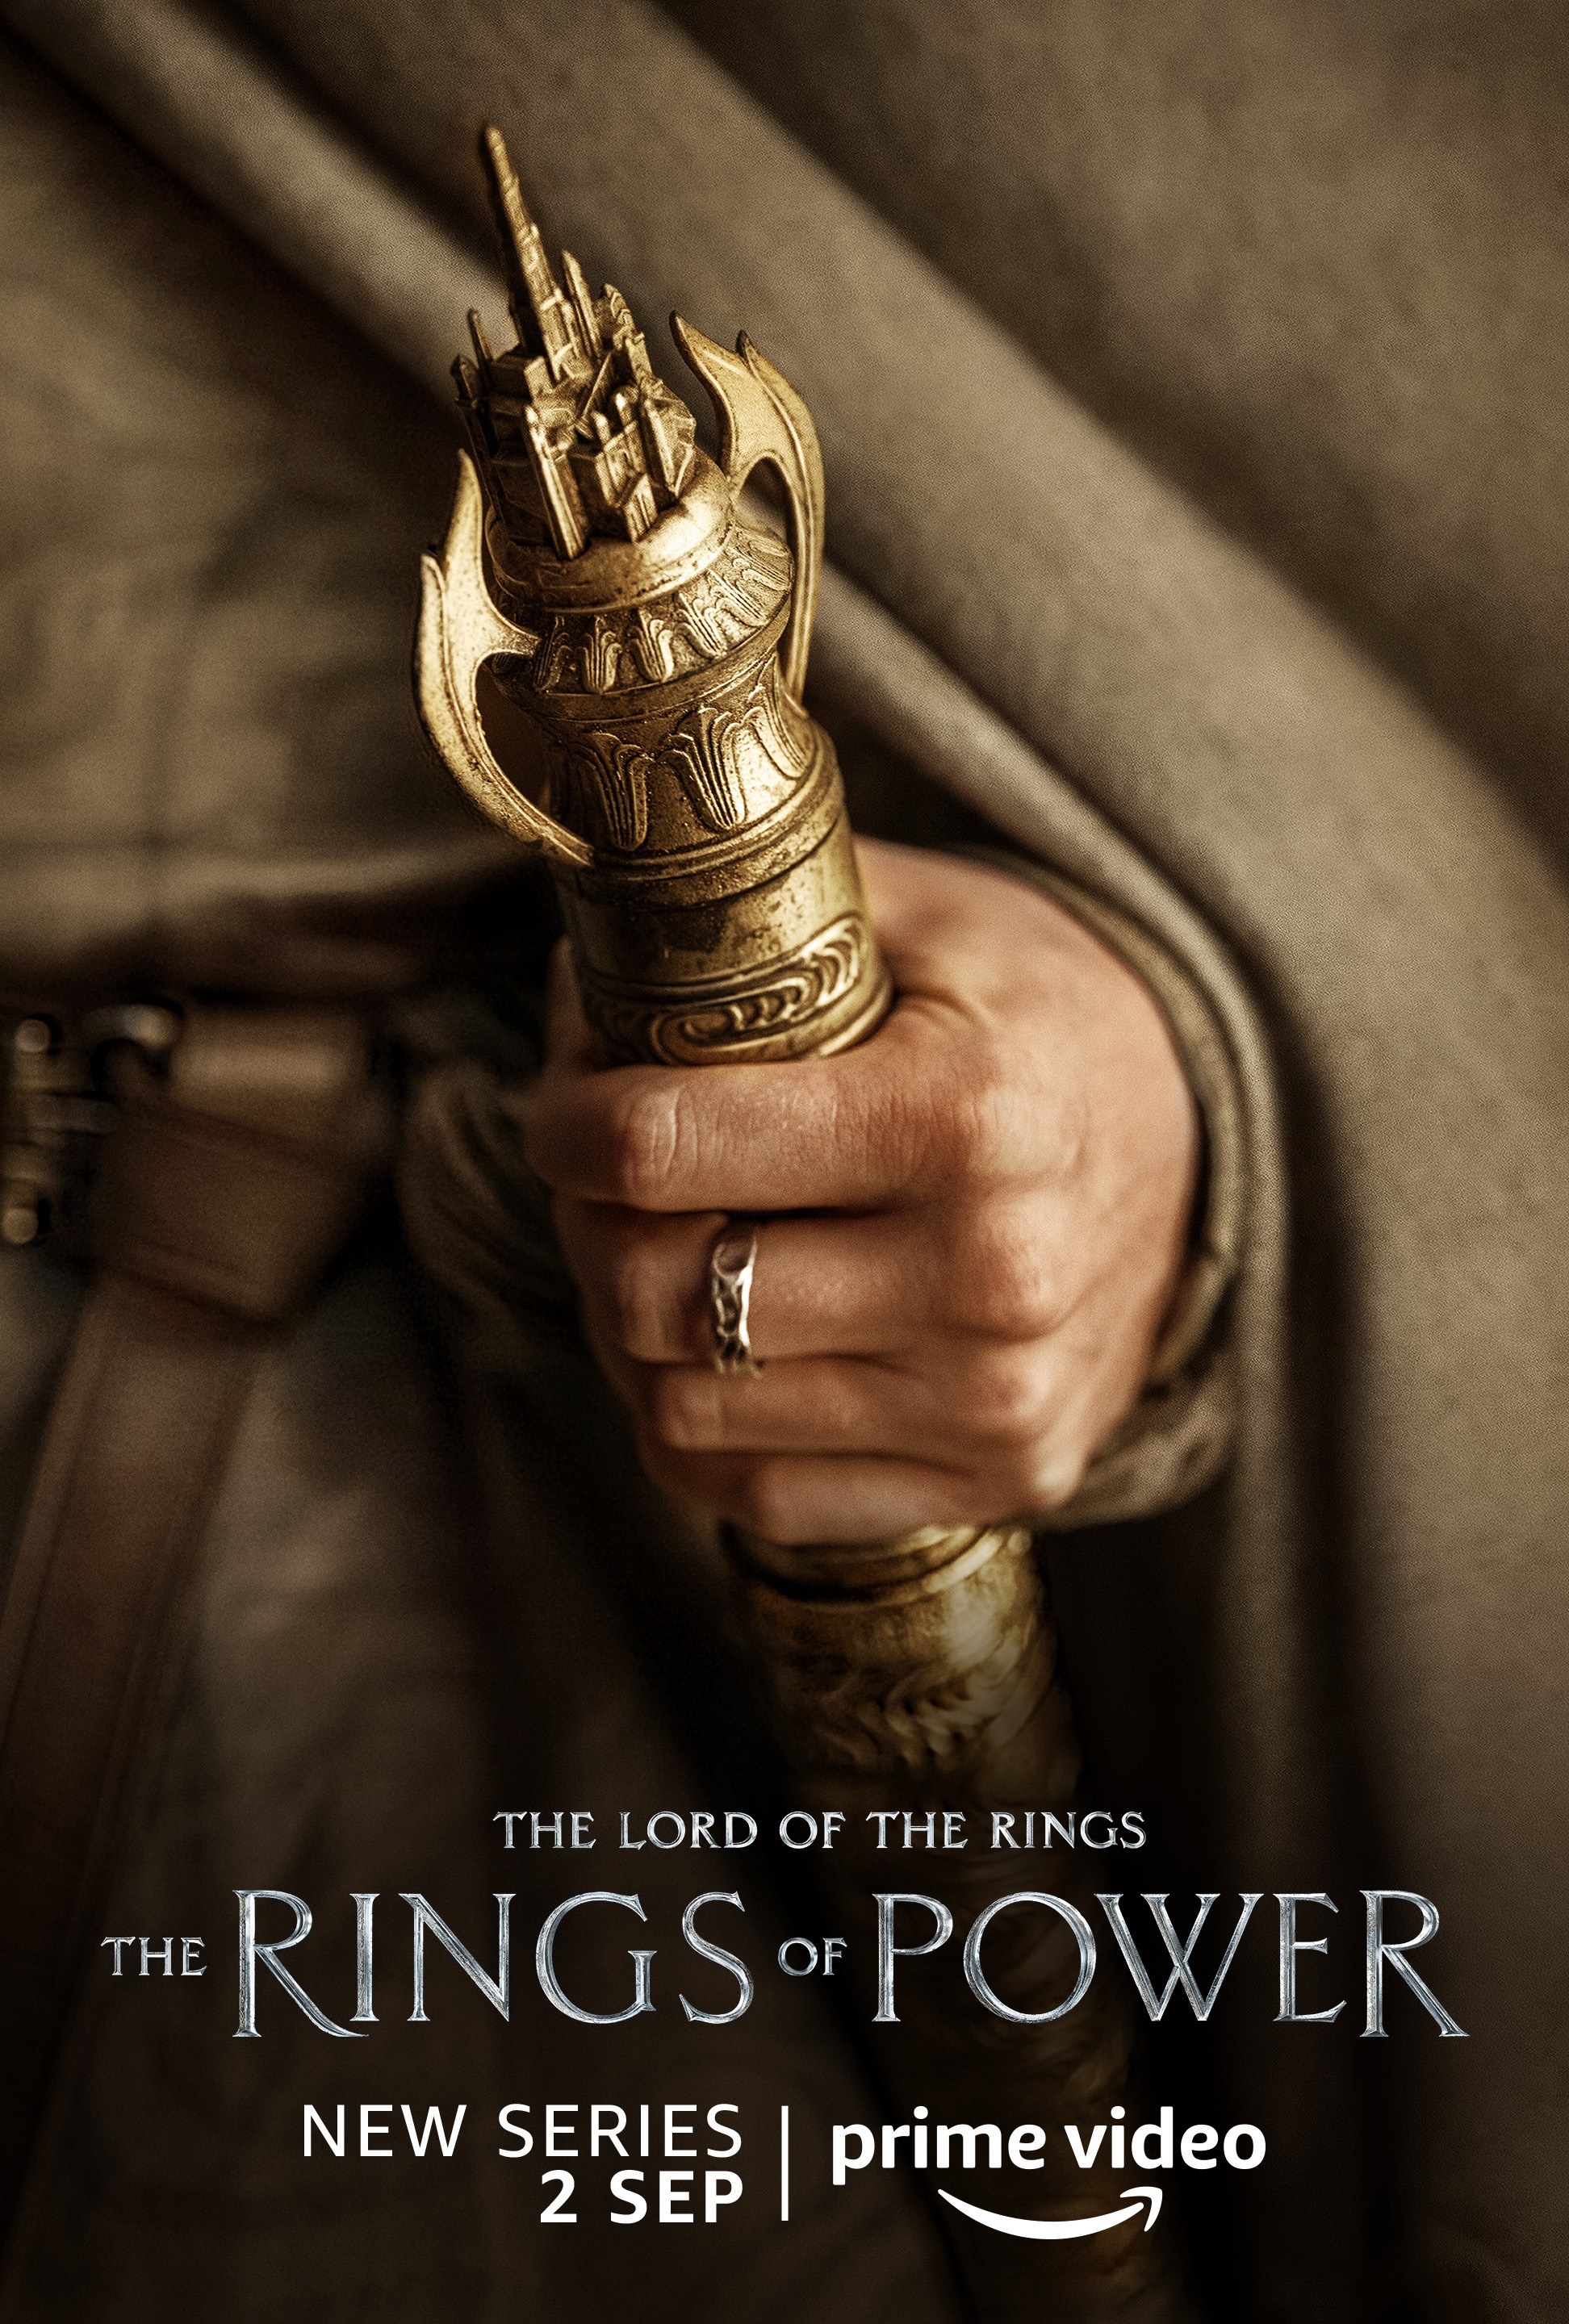 Lord of the Rings TV show teases its sizable cast in new posters